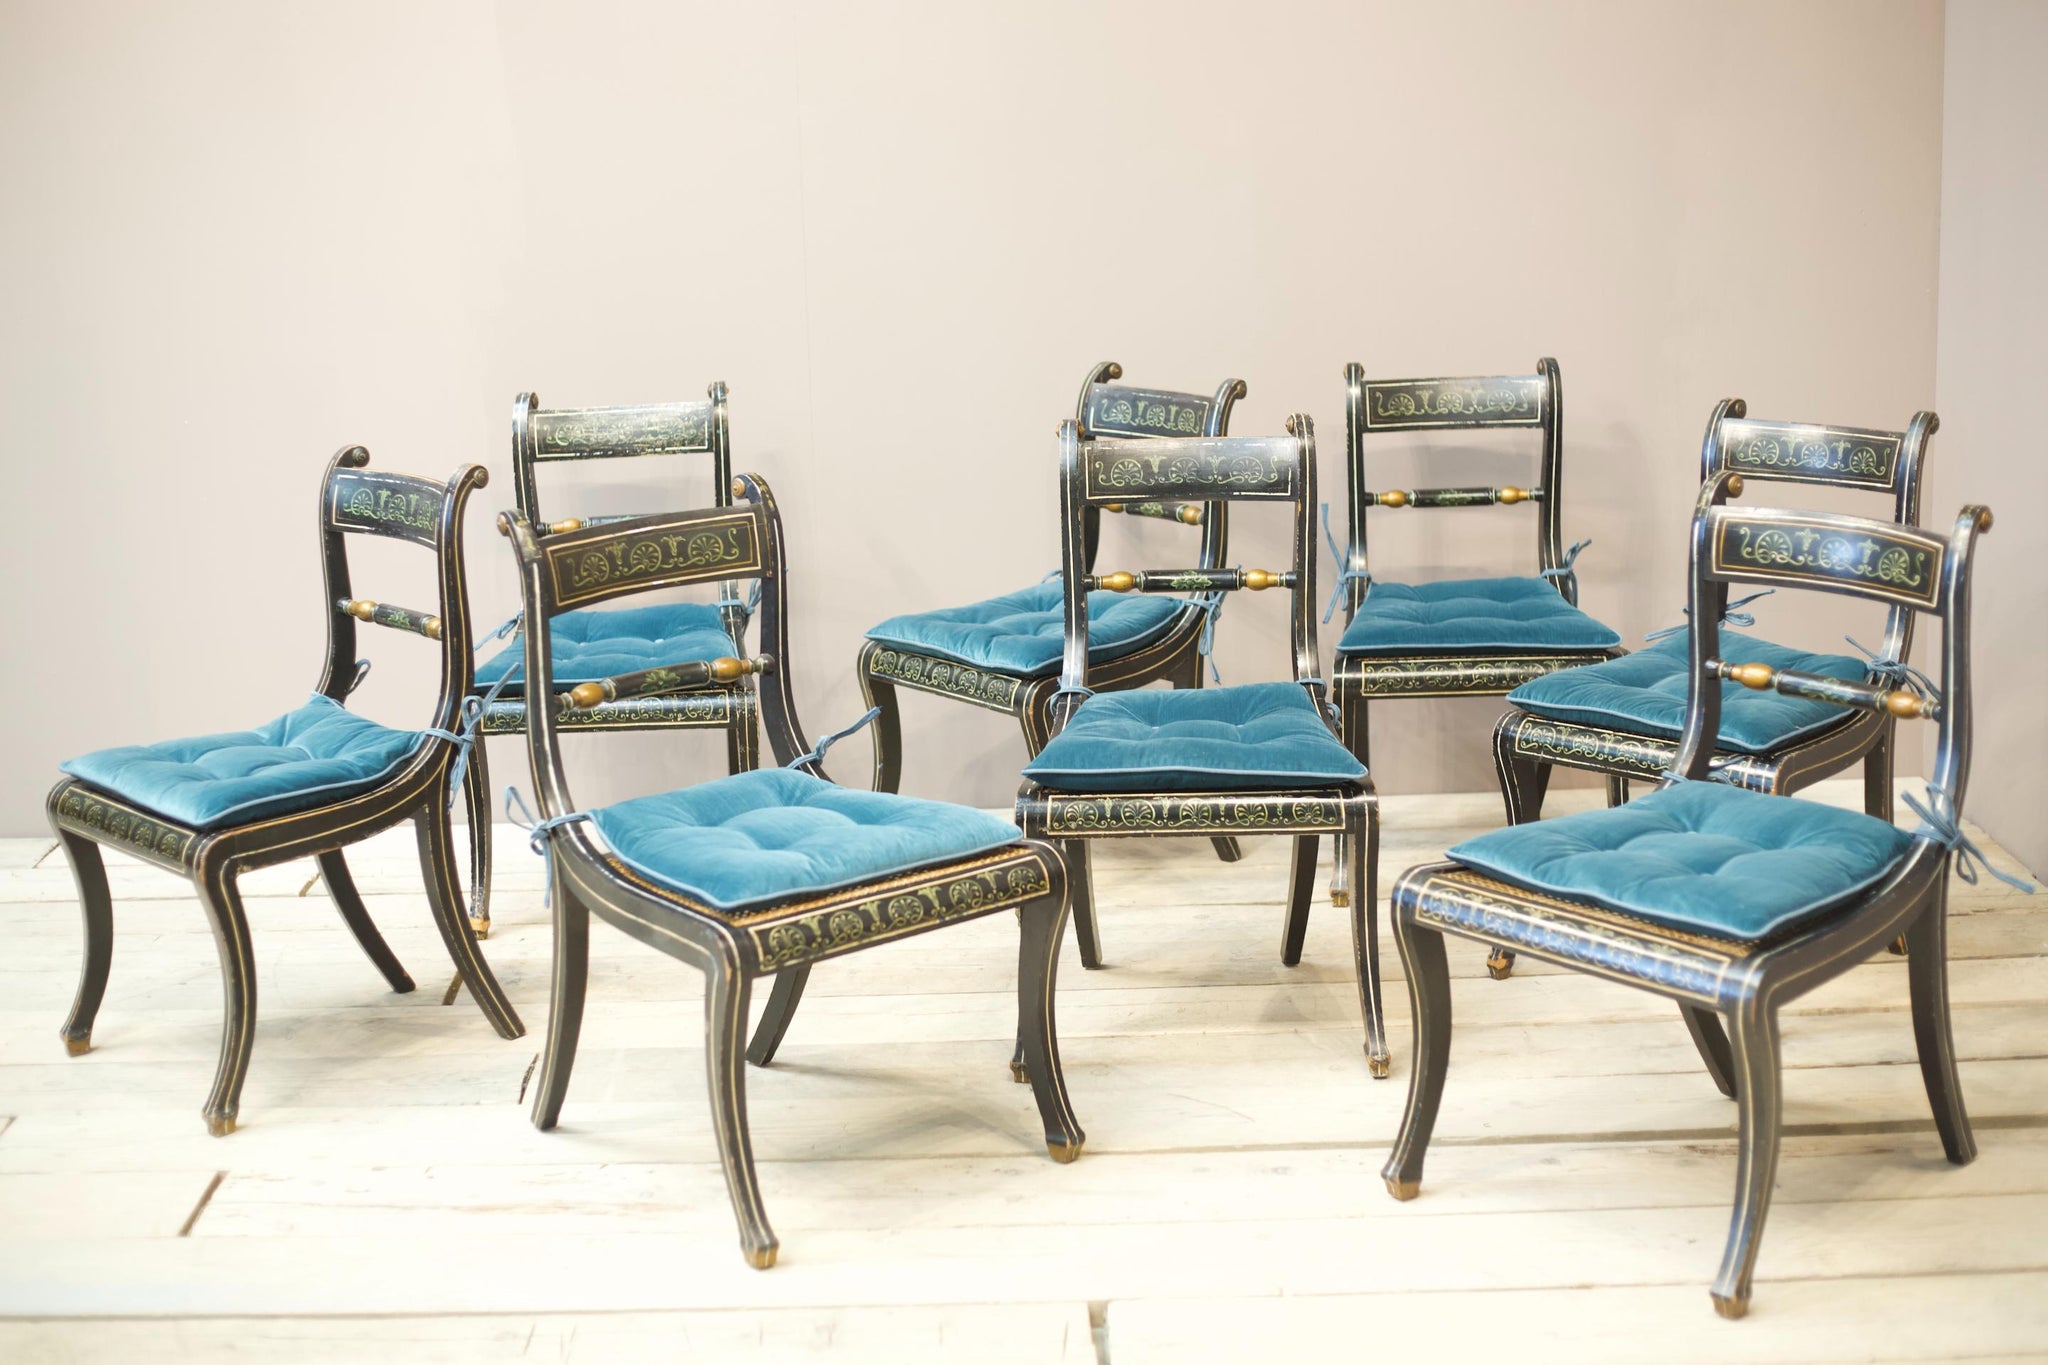 Set of 8 Georgian regency period dining chairs with painted decoration